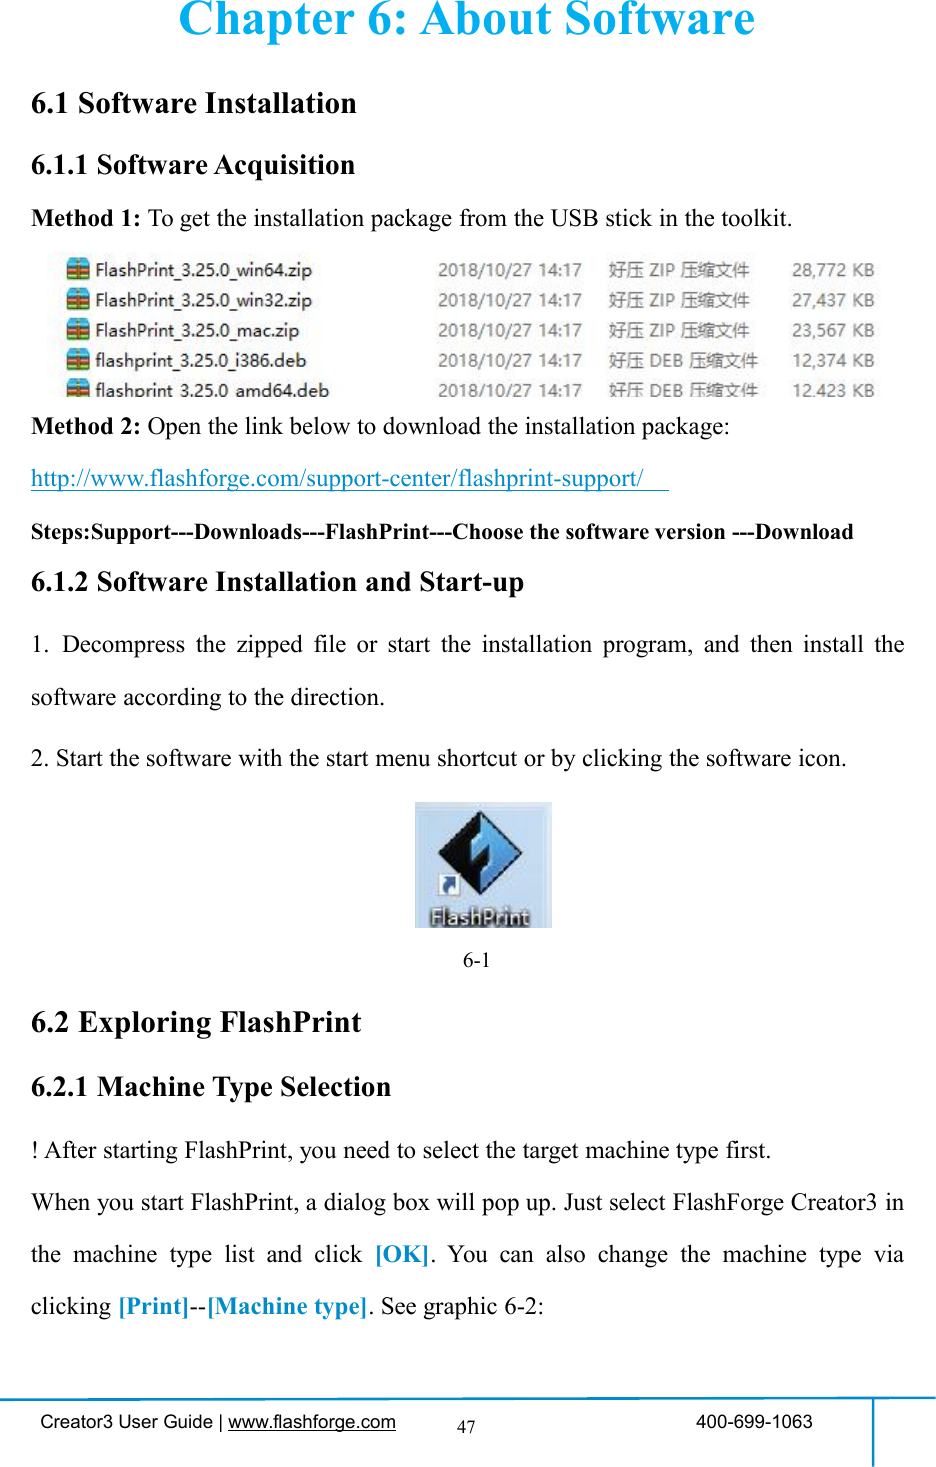 Creator3 User Guide | www.flashforge.com 400-699-106347Chapter 6: About Software6.1 Software Installation6.1.1 Software AcquisitionMethod 1: To get the installation package from the USB stick in the toolkit.Method 2: Open the link below to download the installation package:http://www.flashforge.com/support-center/flashprint-support/Steps:Support---Downloads---FlashPrint---Choose the software version ---Download6.1.2 Software Installation and Start-up1. Decompress the zipped file or start the installation program, and then install thesoftware according to the direction.2. Start the software with the start menu shortcut or by clicking the software icon.6-16.2 Exploring FlashPrint6.2.1 Machine Type Selection! After starting FlashPrint, you need to select the target machine type first.When you start FlashPrint, a dialog box will pop up. Just select FlashForge Creator3 inthe machine type list and click [OK]. You can also change the machine type viaclicking [Print]--[Machine type]. See graphic 6-2: